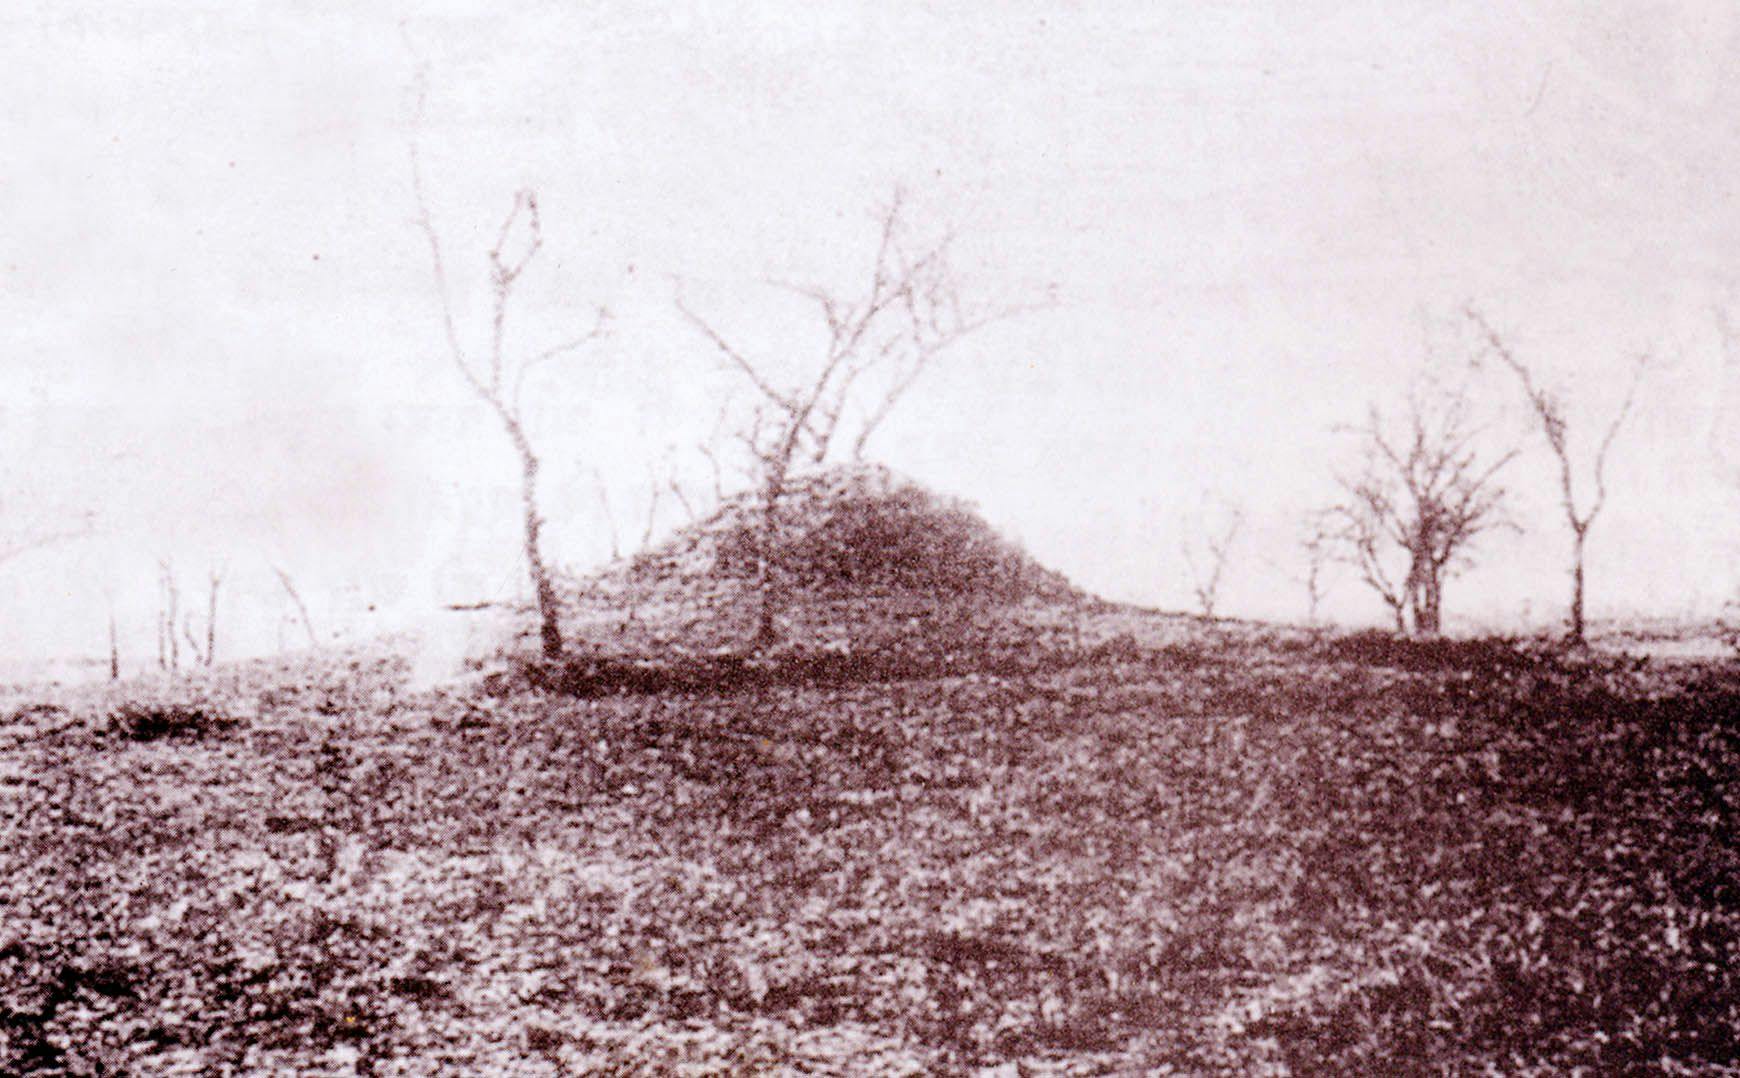 Tumulus above the hidden well